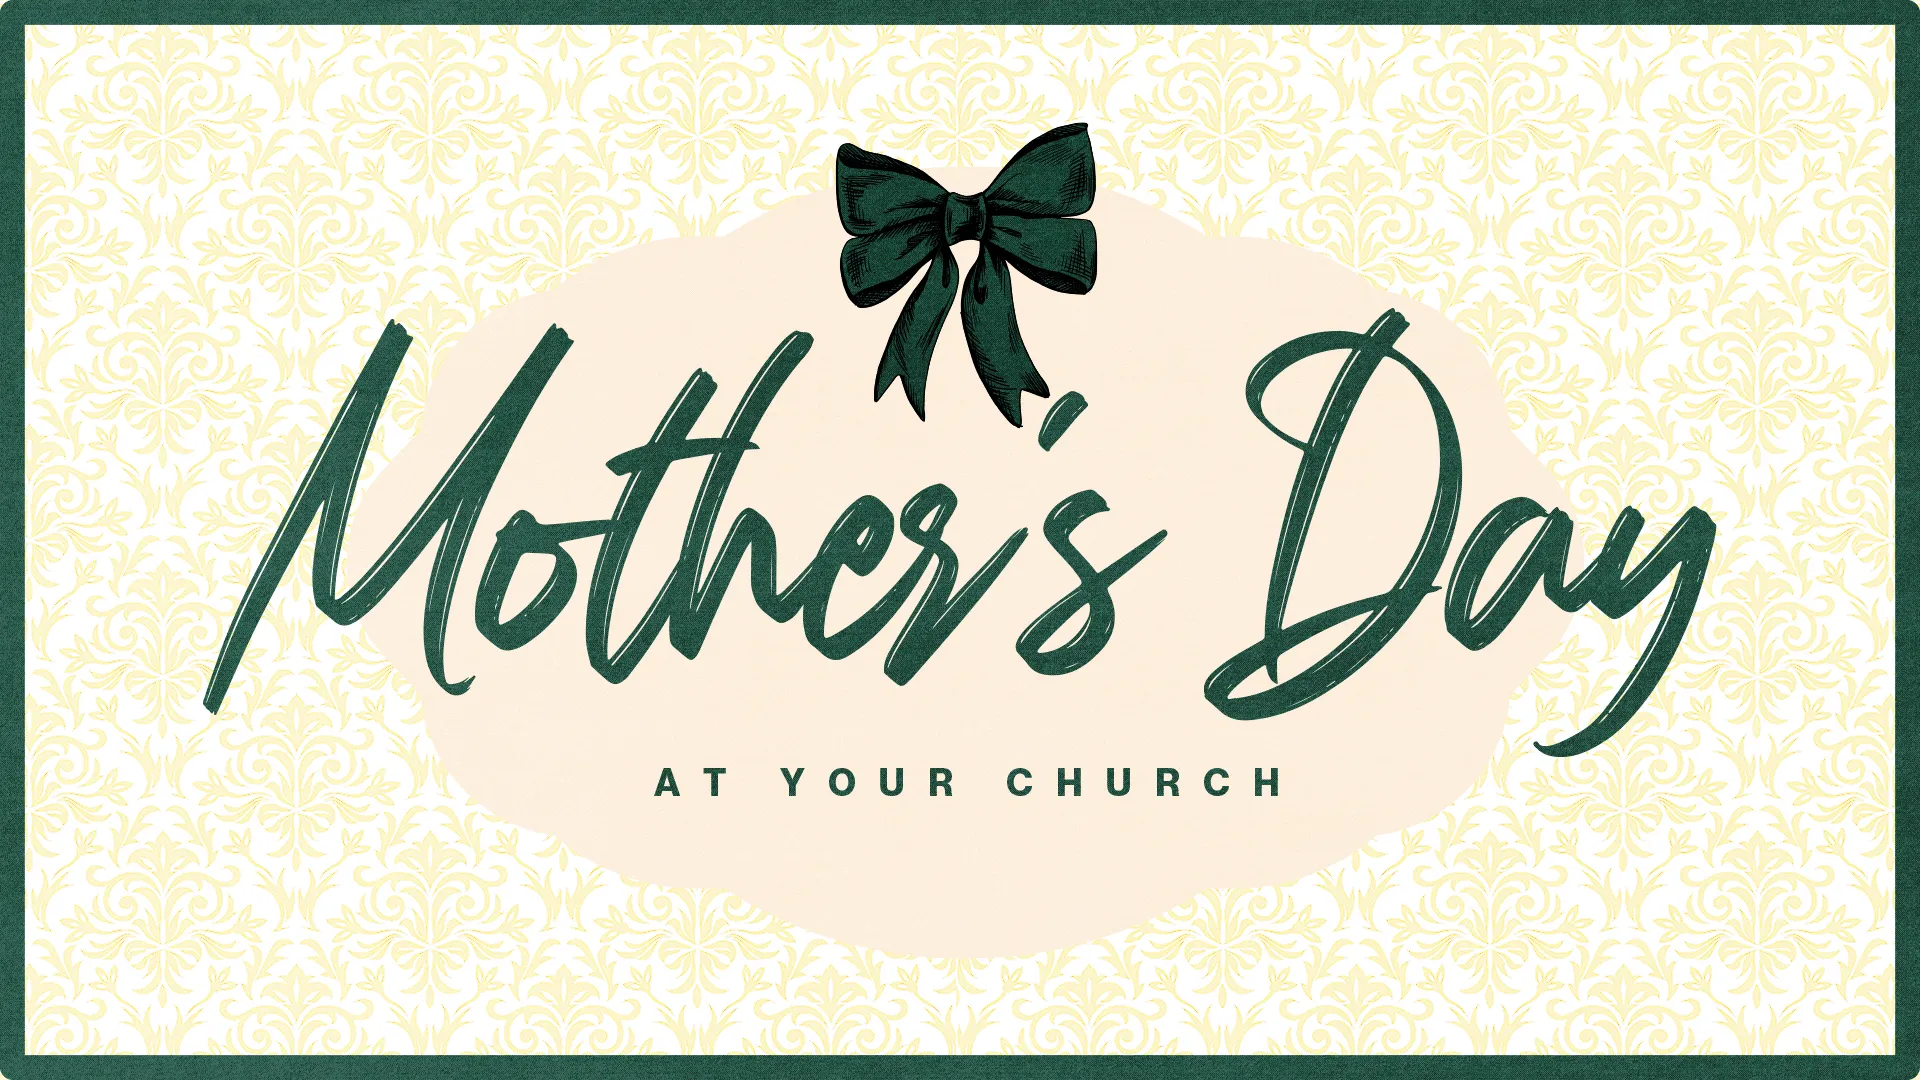 Show Your Love And Respect For All The Mothers With This Beautifully Crafted 'Mother'S Day At Your Church' Graphic. It'S A Wonderful Choice For Church Media, Inviting Families To Celebrate This Special Day Together.